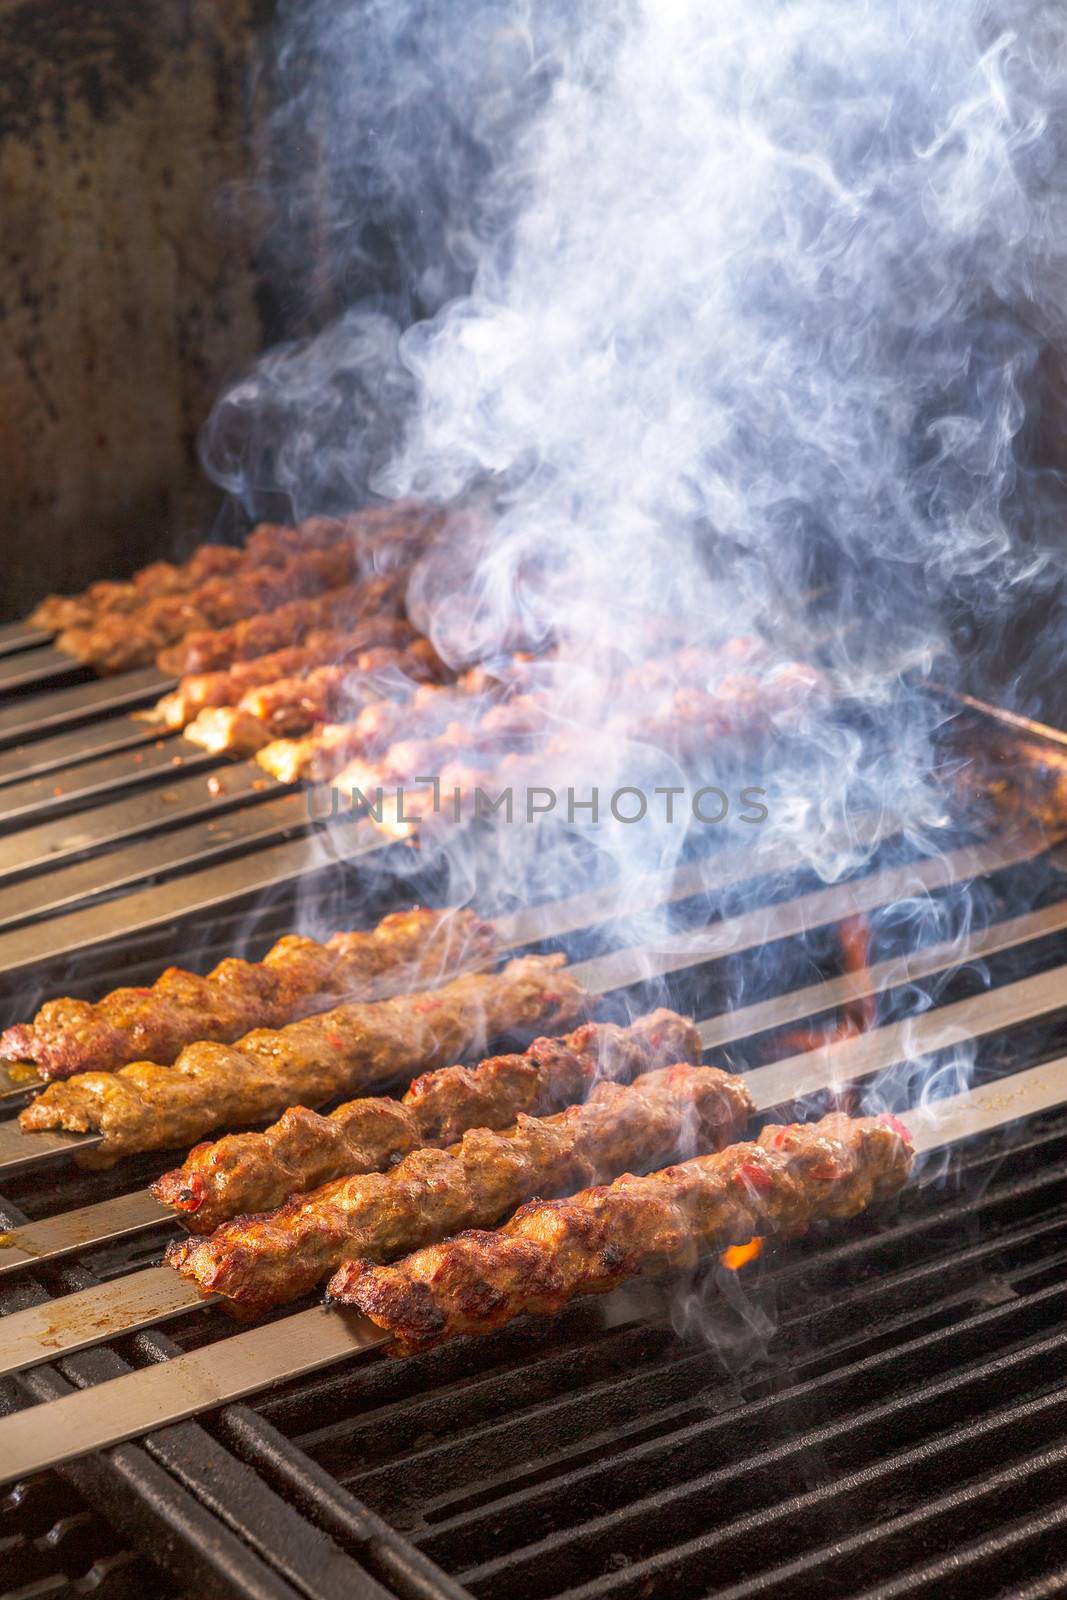 Cooking Adana Lamb Kebabs on the Restaurant Style Grill by coskun